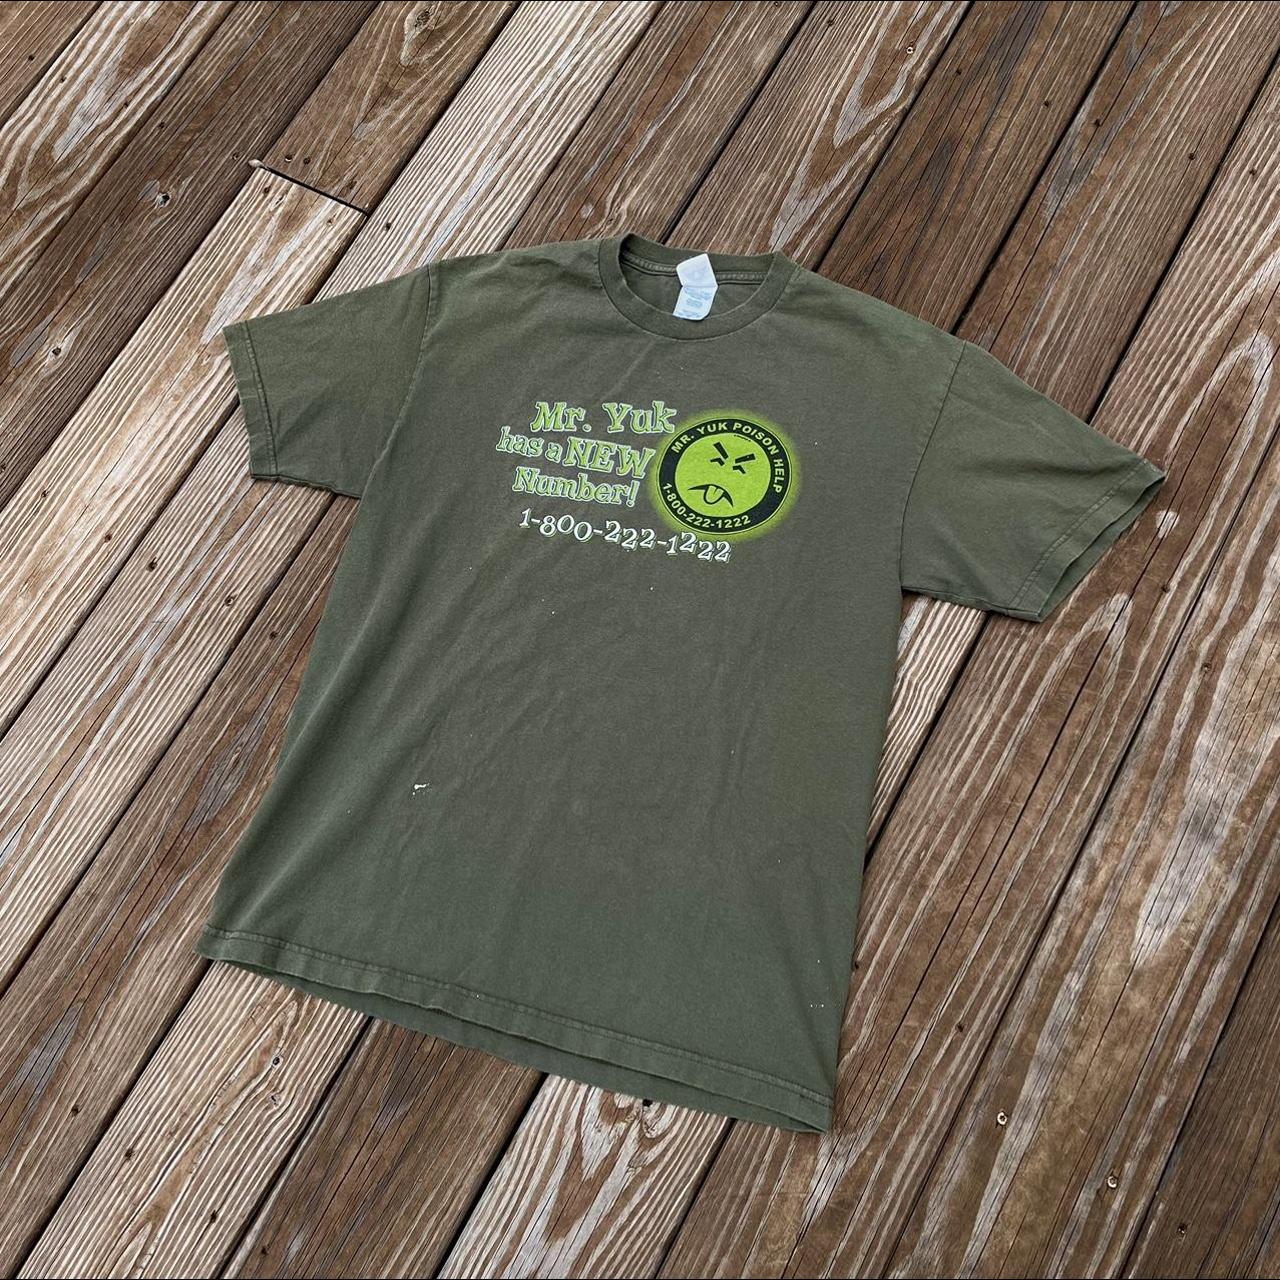 Mr. Yuk Poison Help has a new number tee shirt size... - Depop